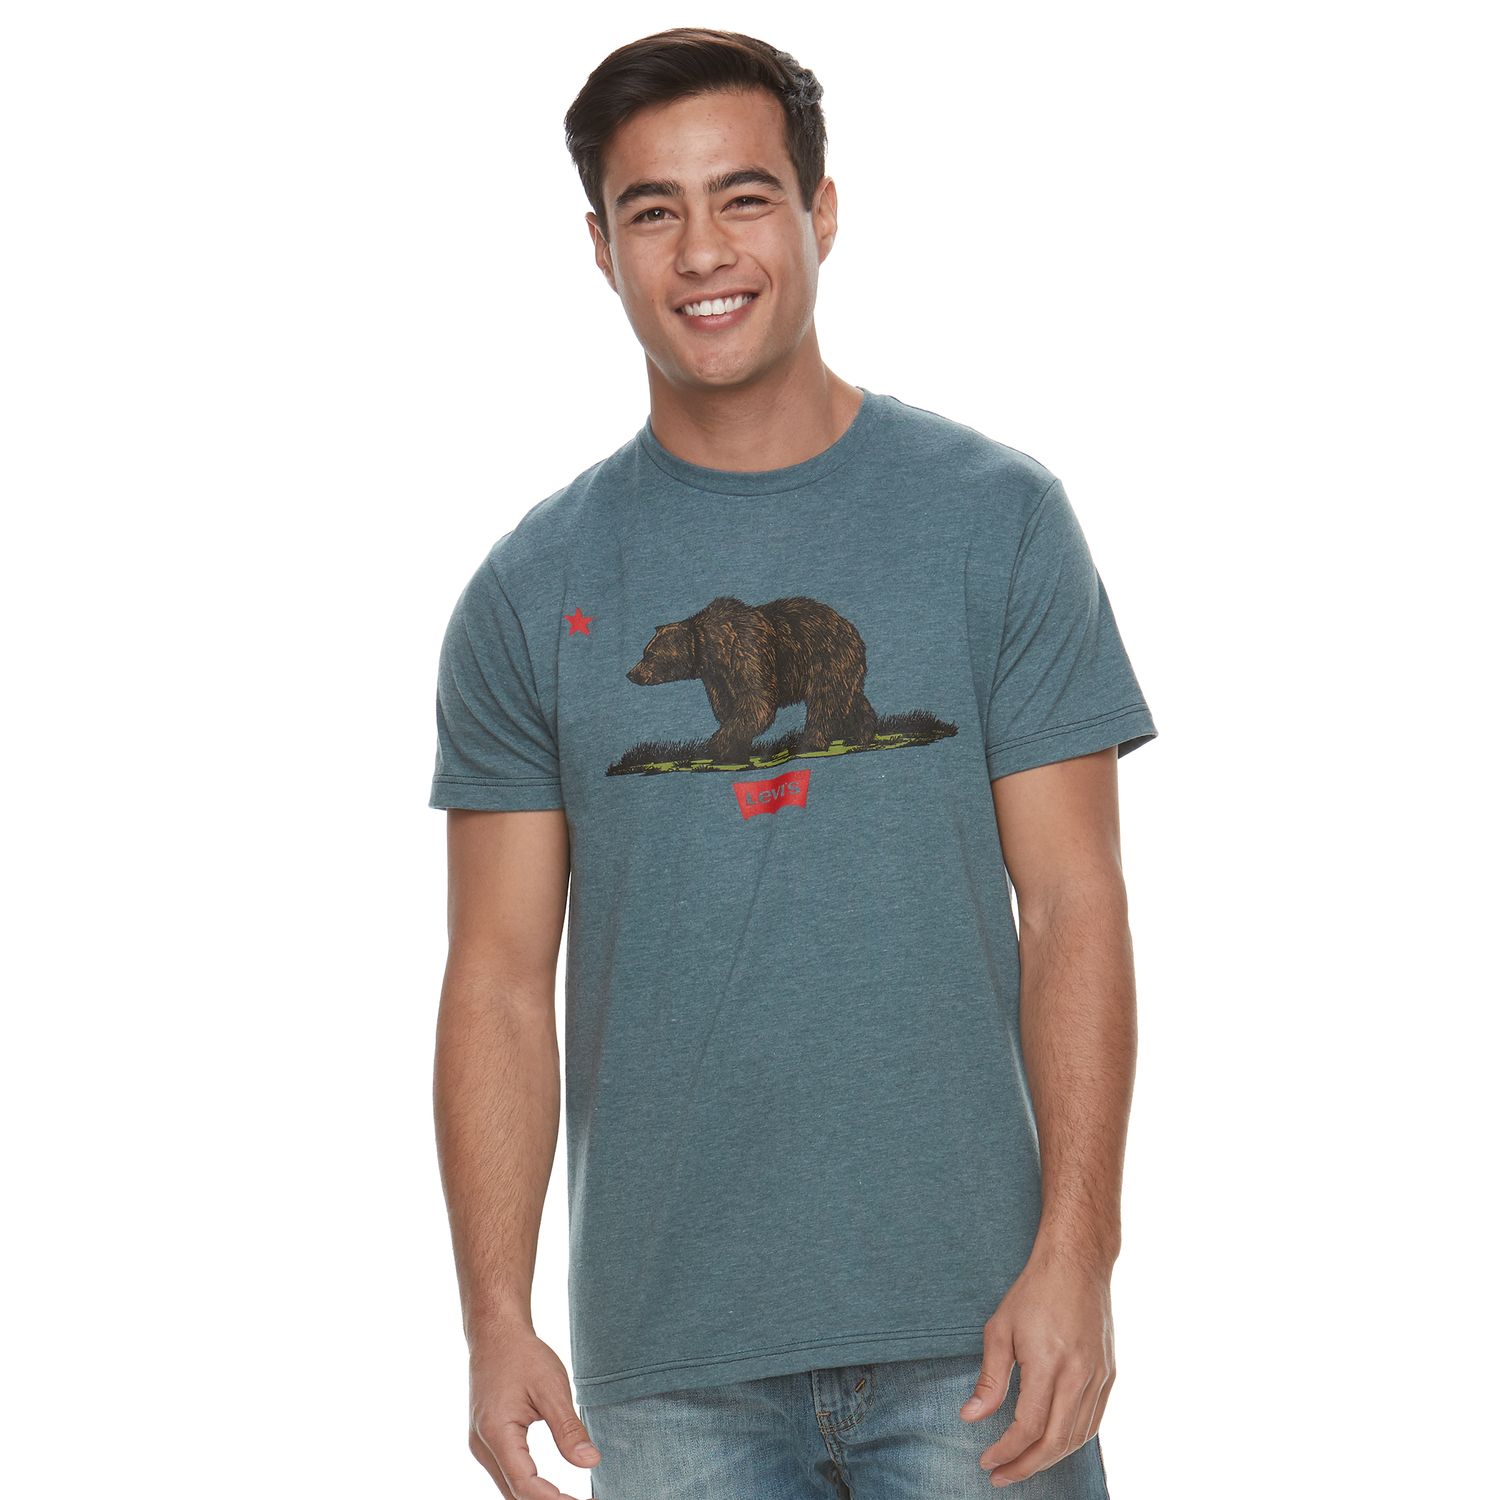 Image for Levi's Men's Plumage Tee at Kohl's.